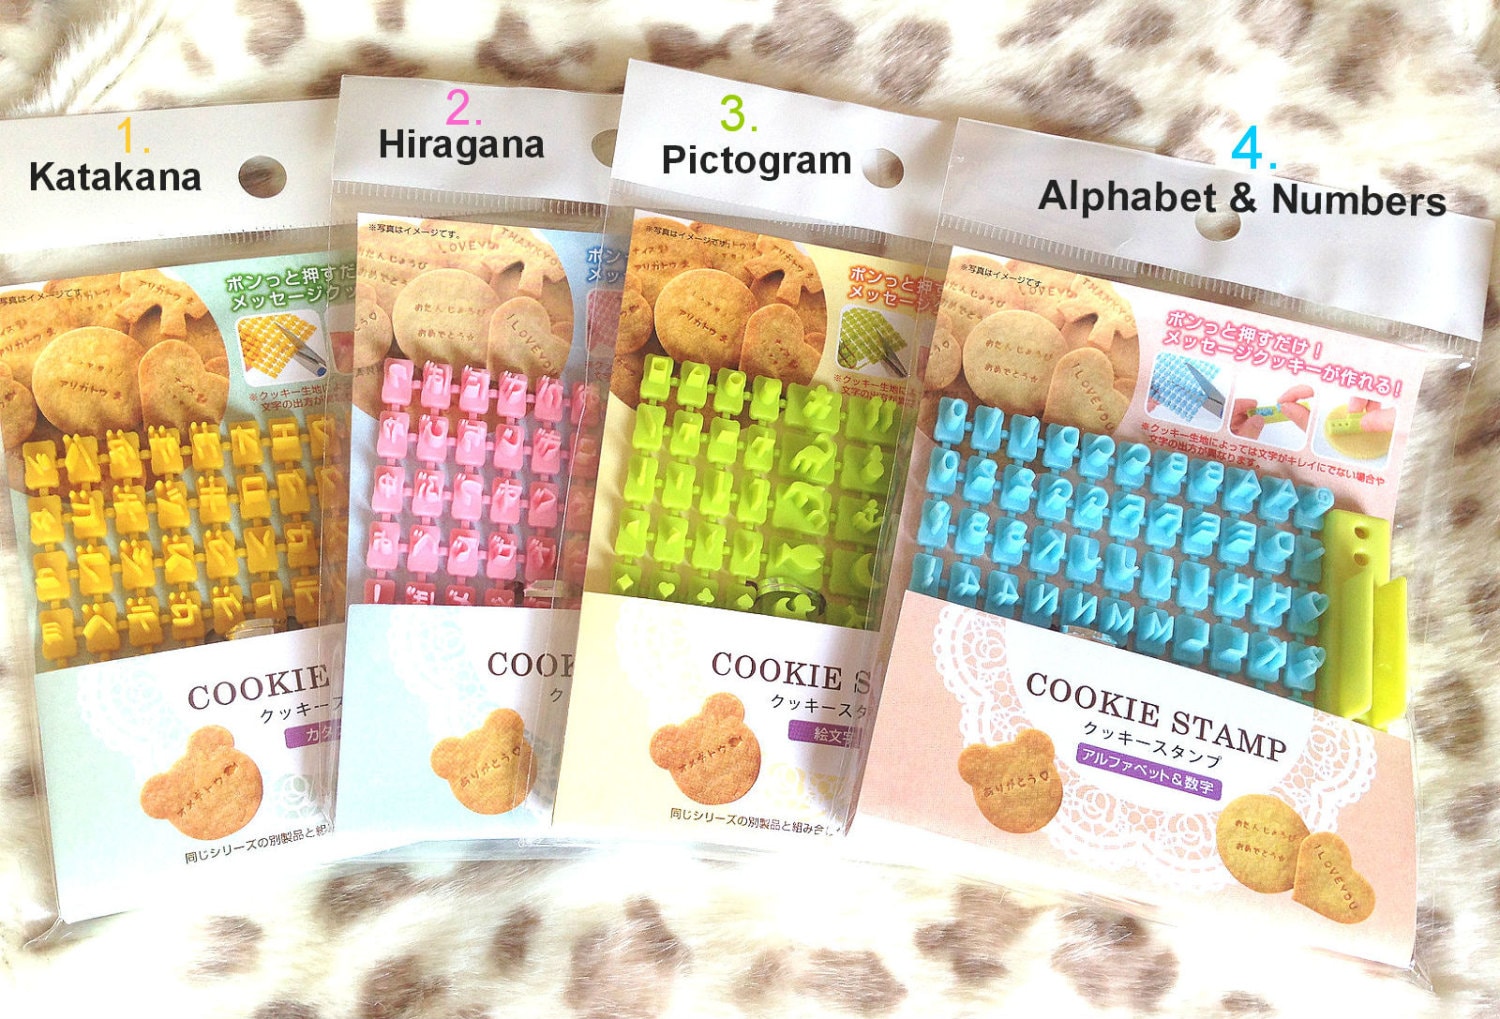 12 Pcs Alphabet Cake Stamp Tool Kit,Aulufft 5 Pcs DIY Cookie Stamp Letters and Numbers Fondant Cake Mold,2Pcs Acrylic Stamping Blocks,5PCS Cake